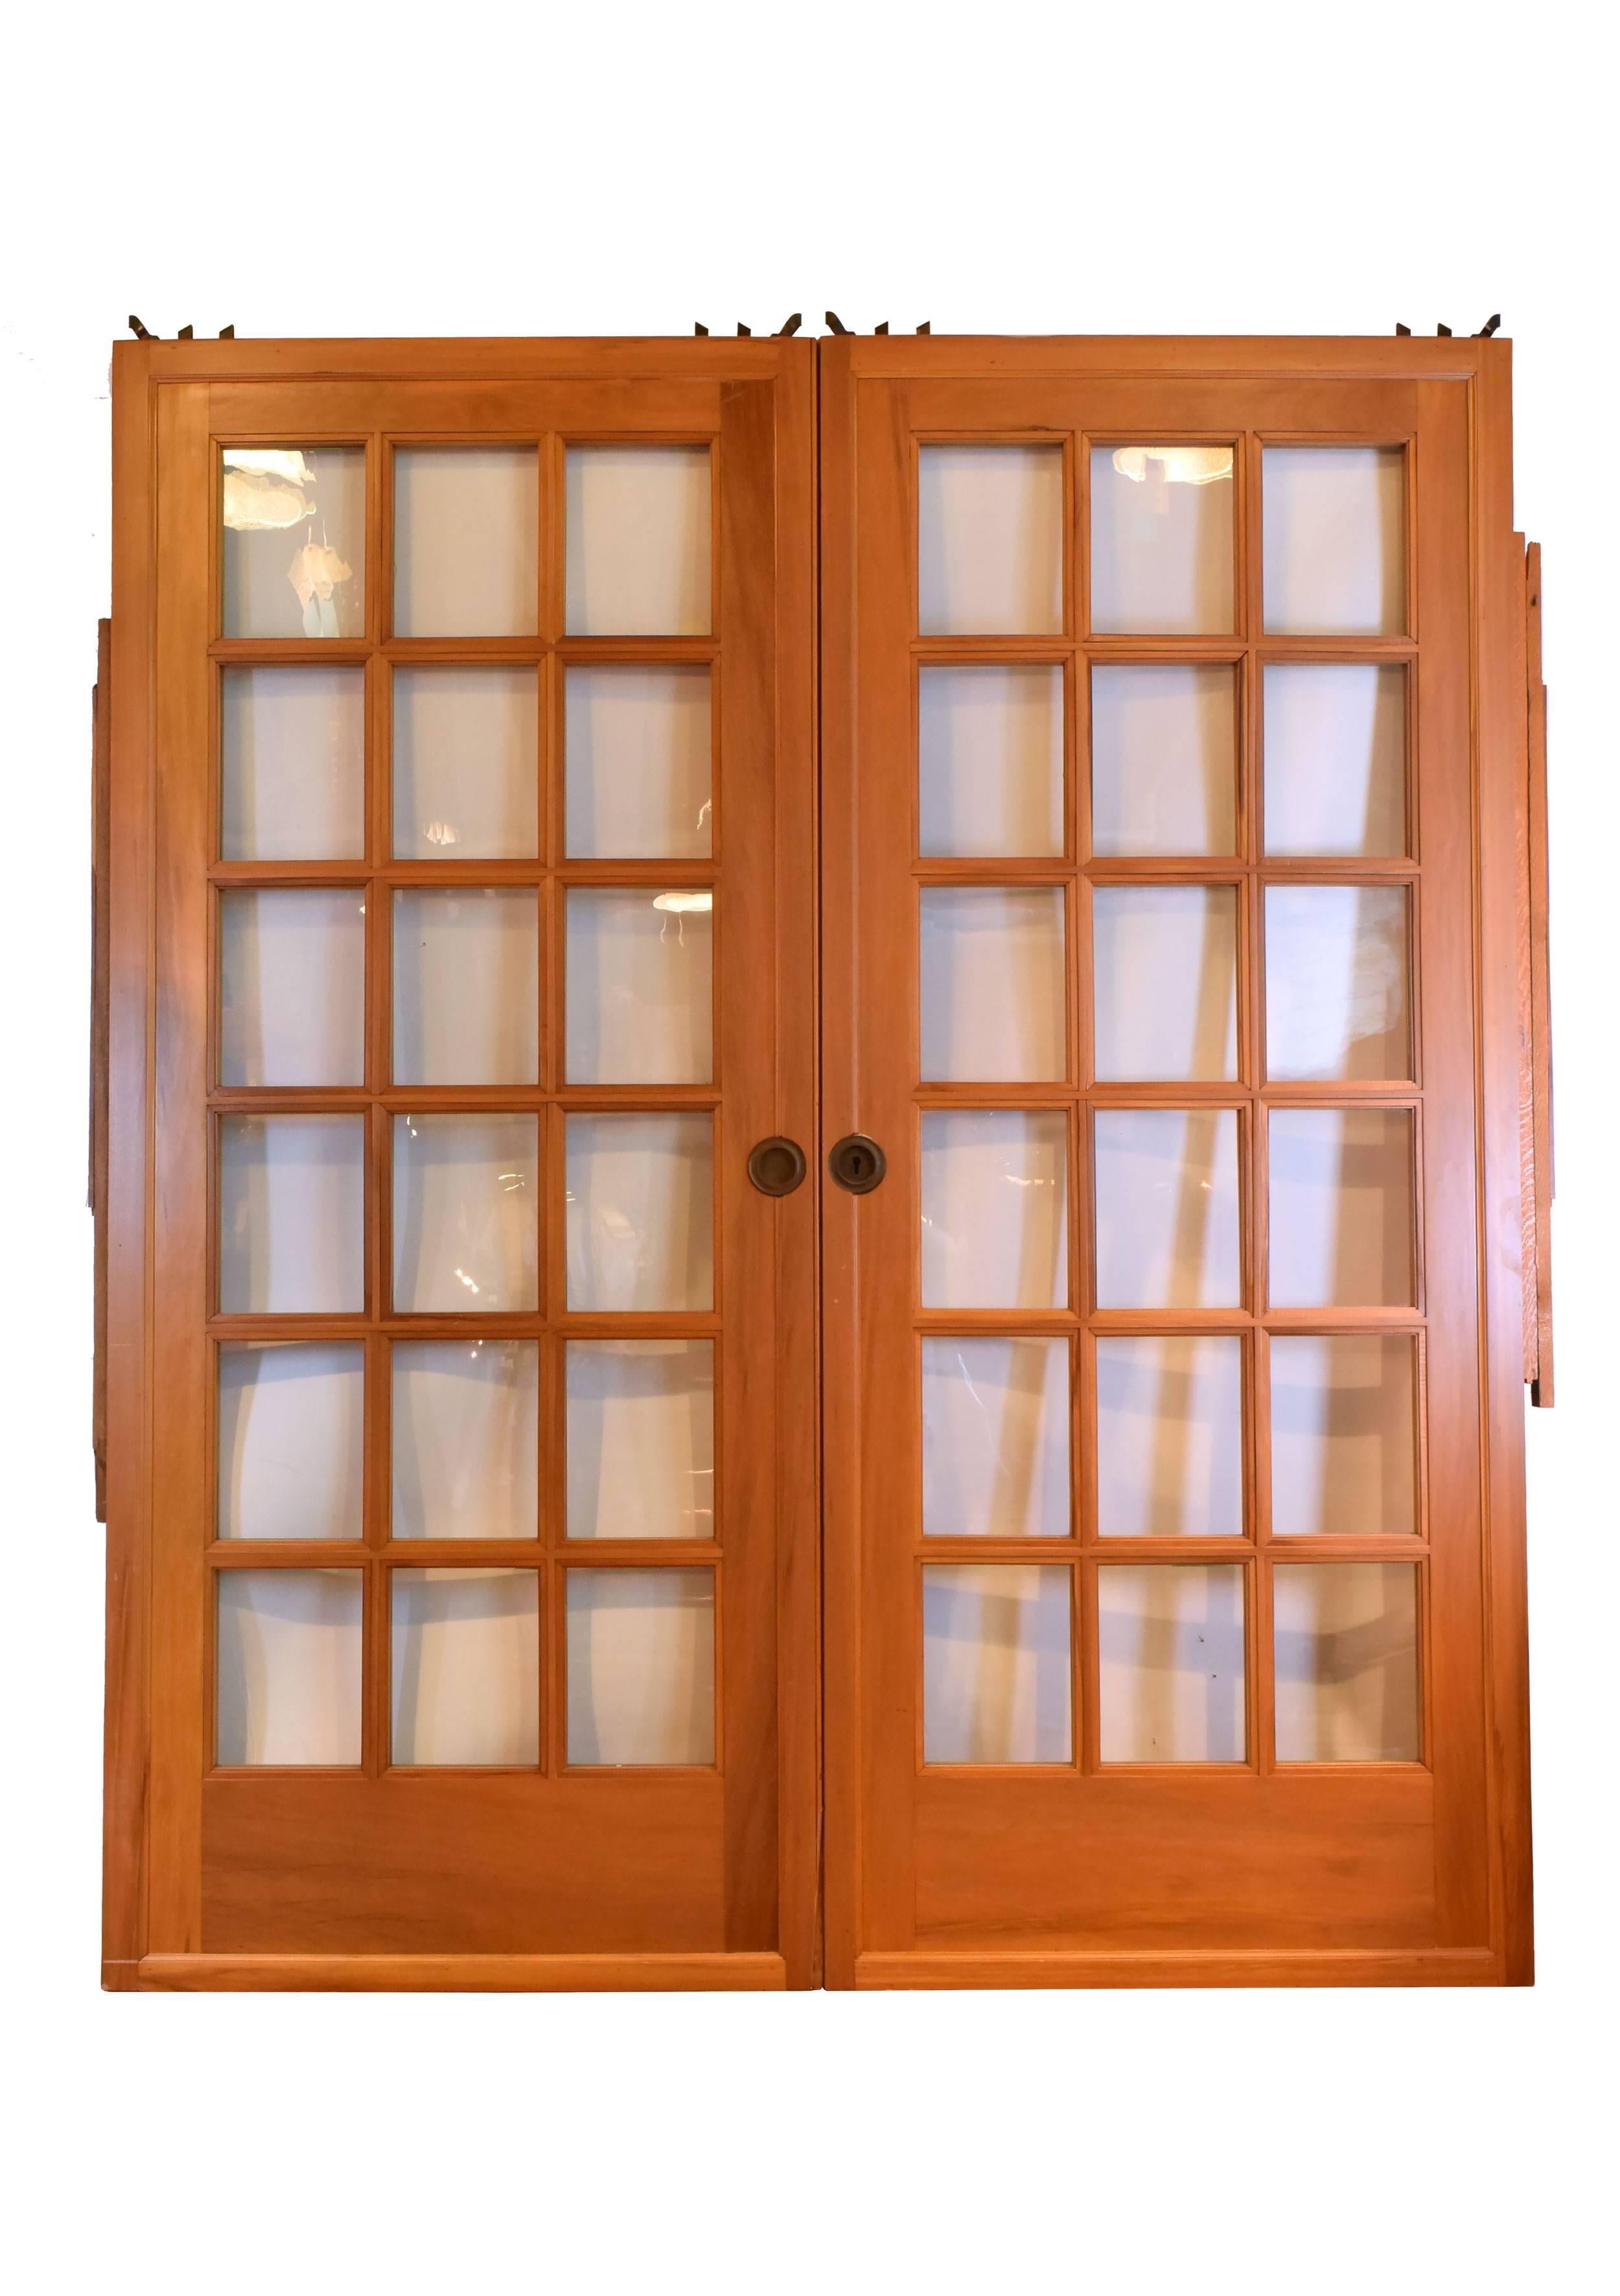 This stunning full-view pocket door set comes complete with jamb, trim and naturally aged brass hardware. Latticework adds interest to this beautiful door that's perfect for a small space, 

circa 1920
Finish: Original
Country of origin: